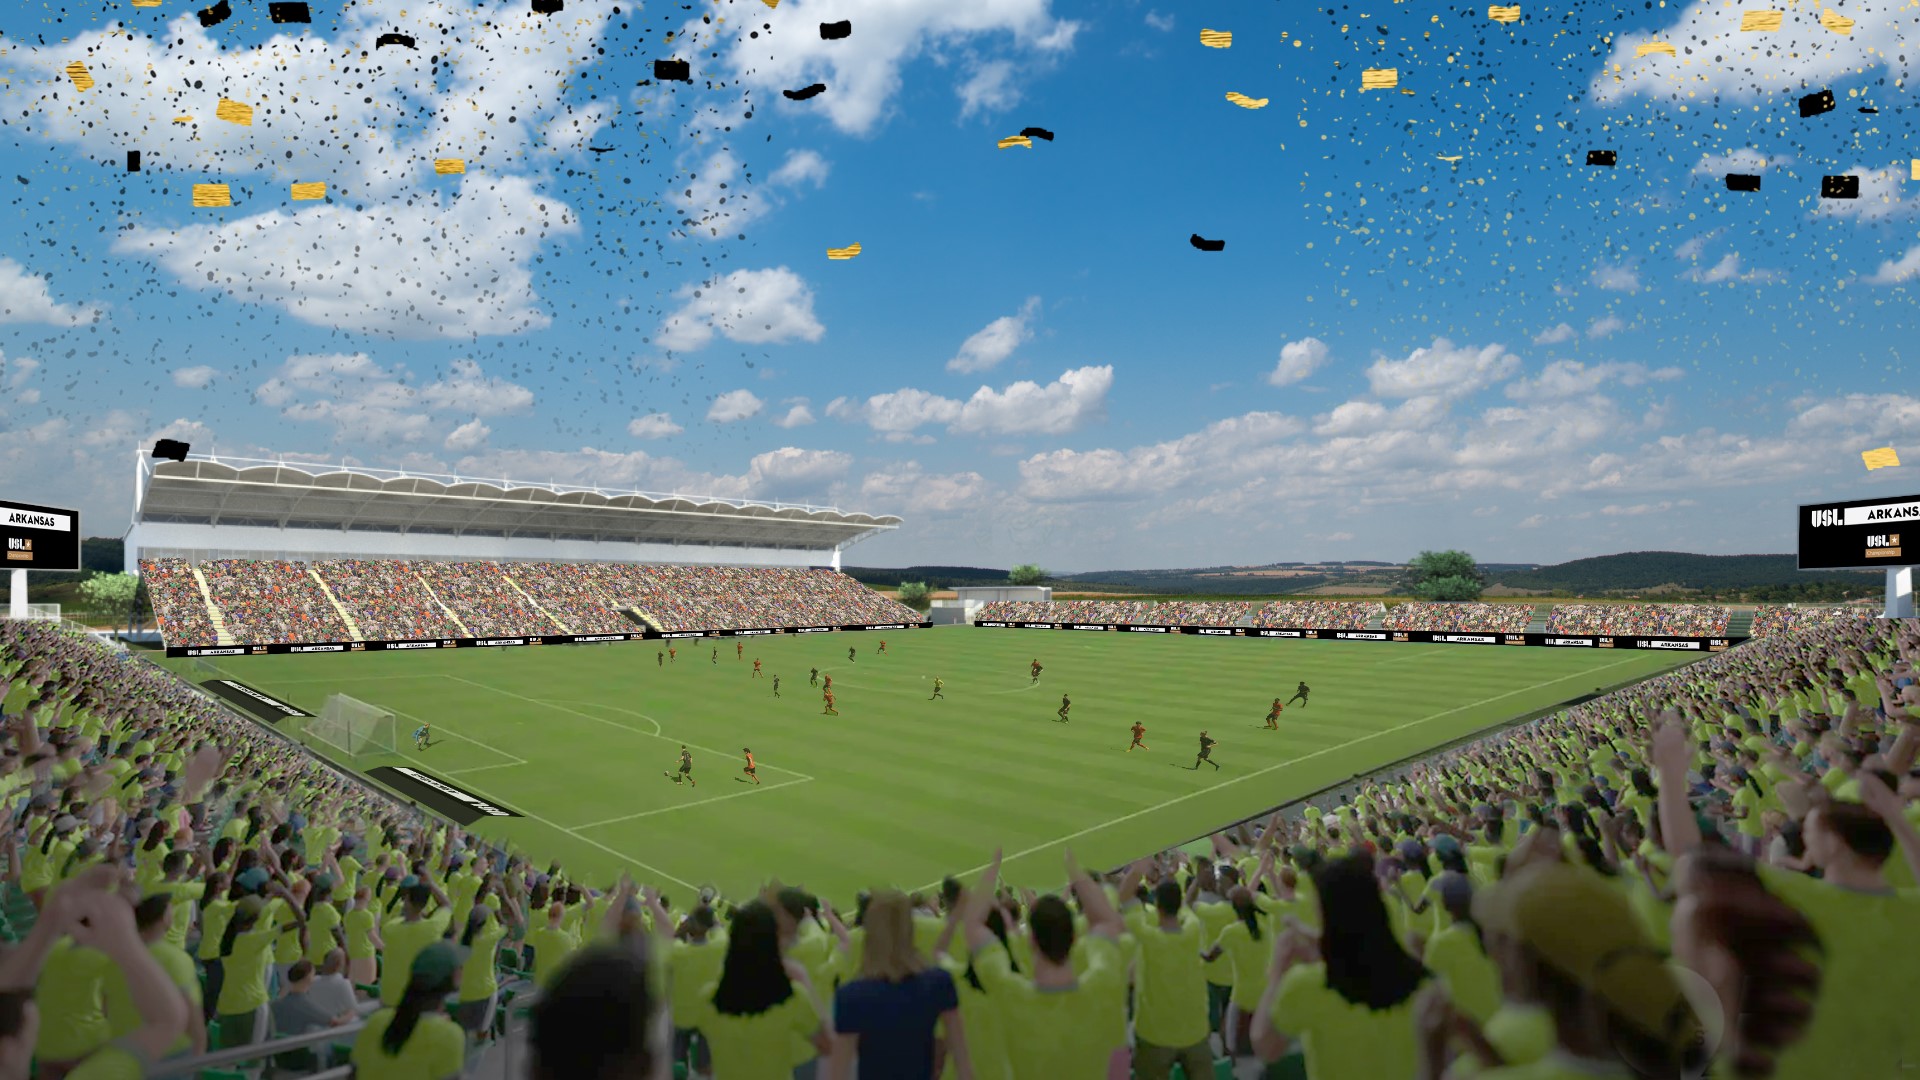 The 5,000+ seat stadium has been approved by the city to be developed on the corner of Bellview Road and S 41st Street.